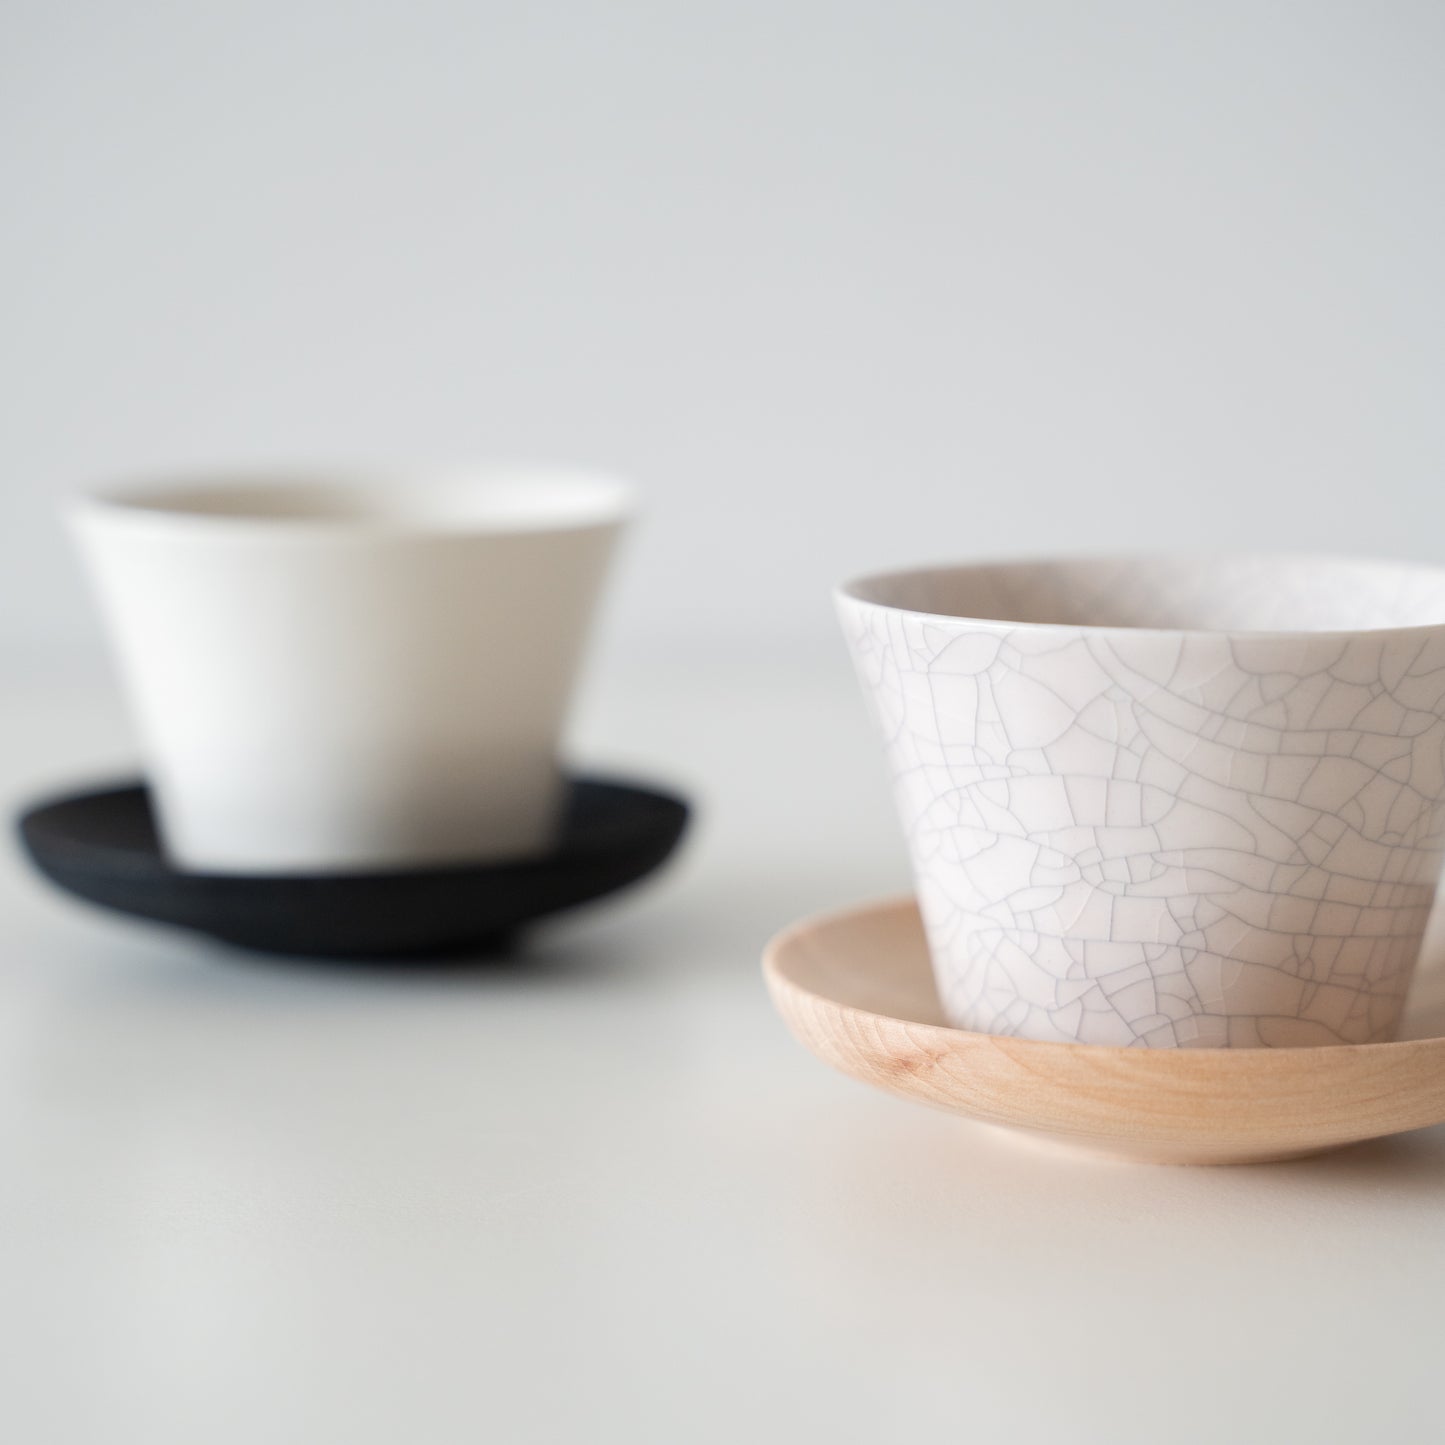 Japanese Teacup with Foot - White with White Crackle